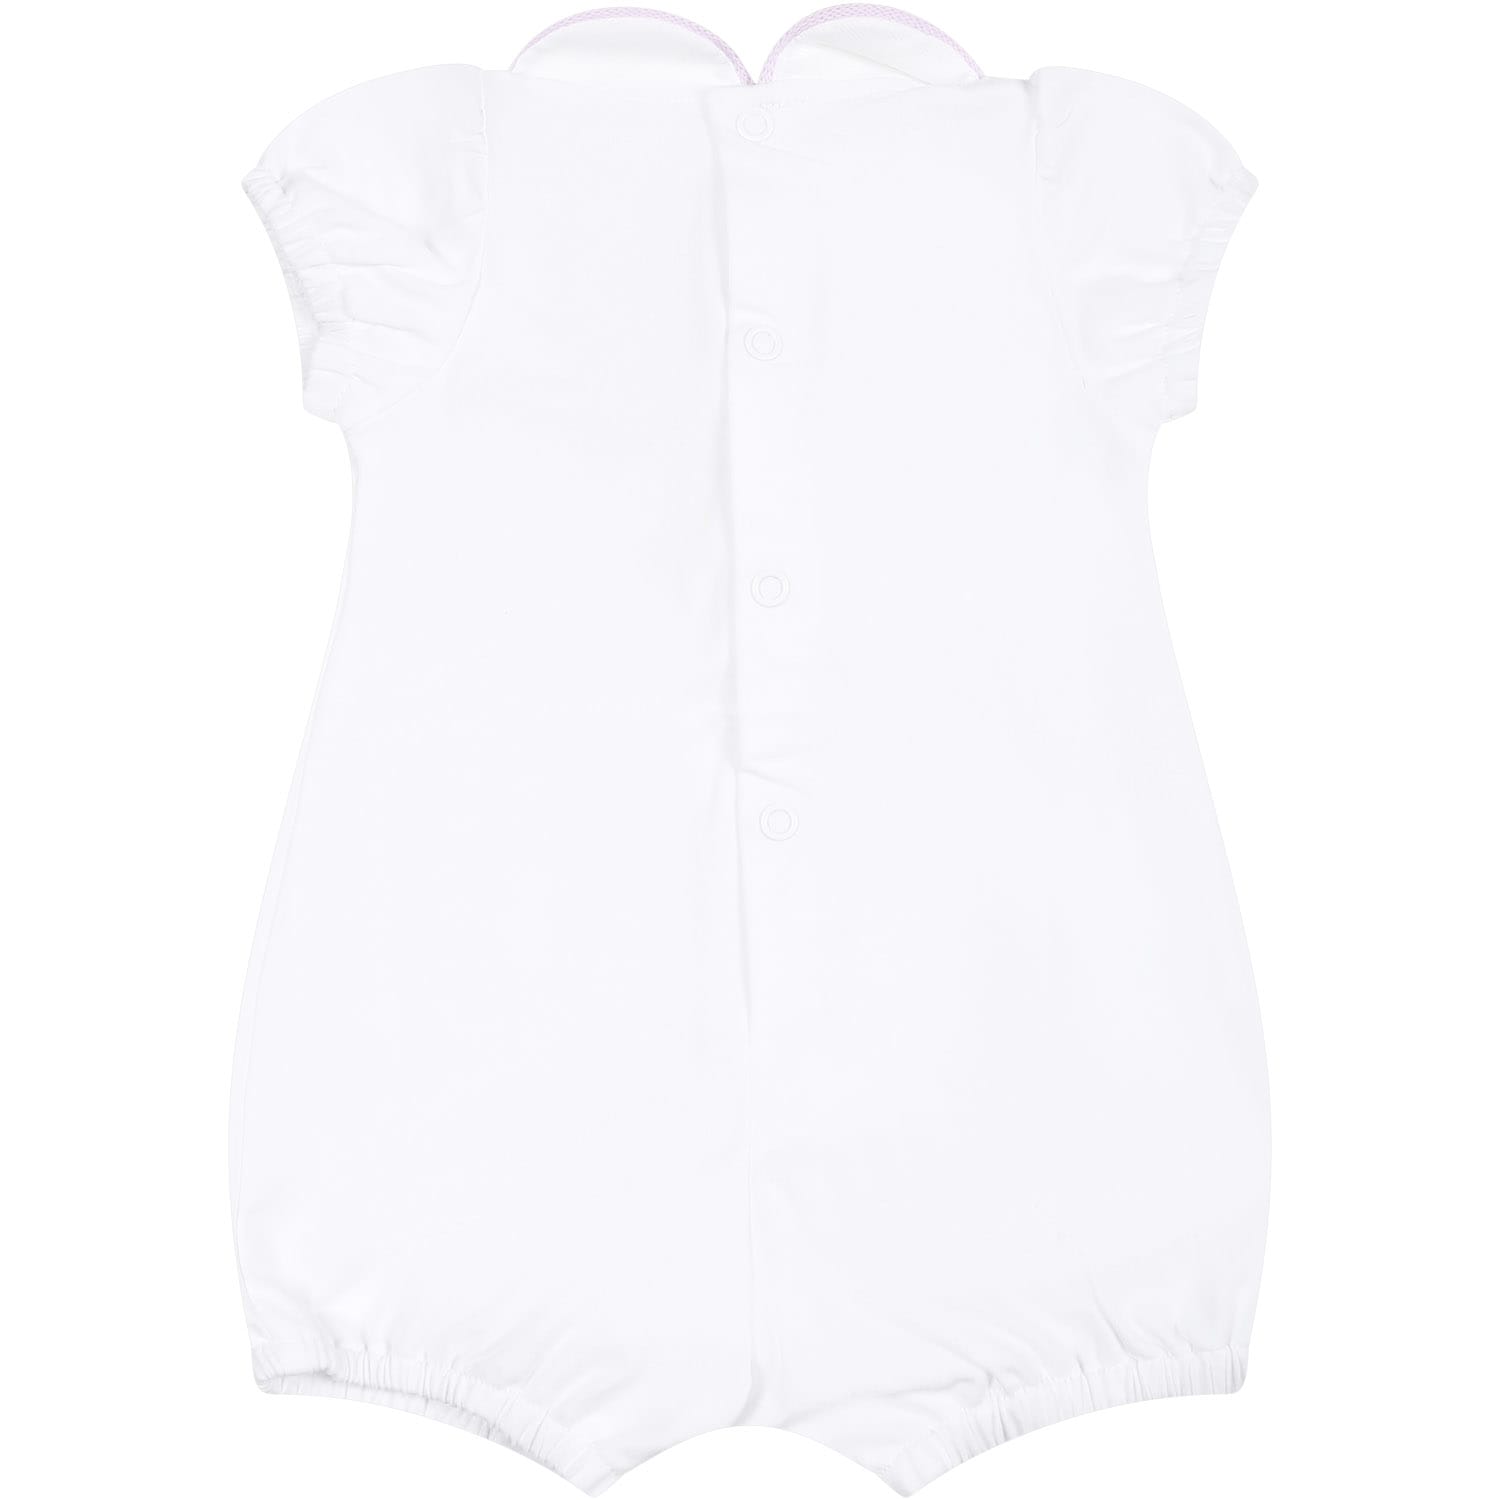 Shop Little Bear White Romper For Baby Girl With Bow